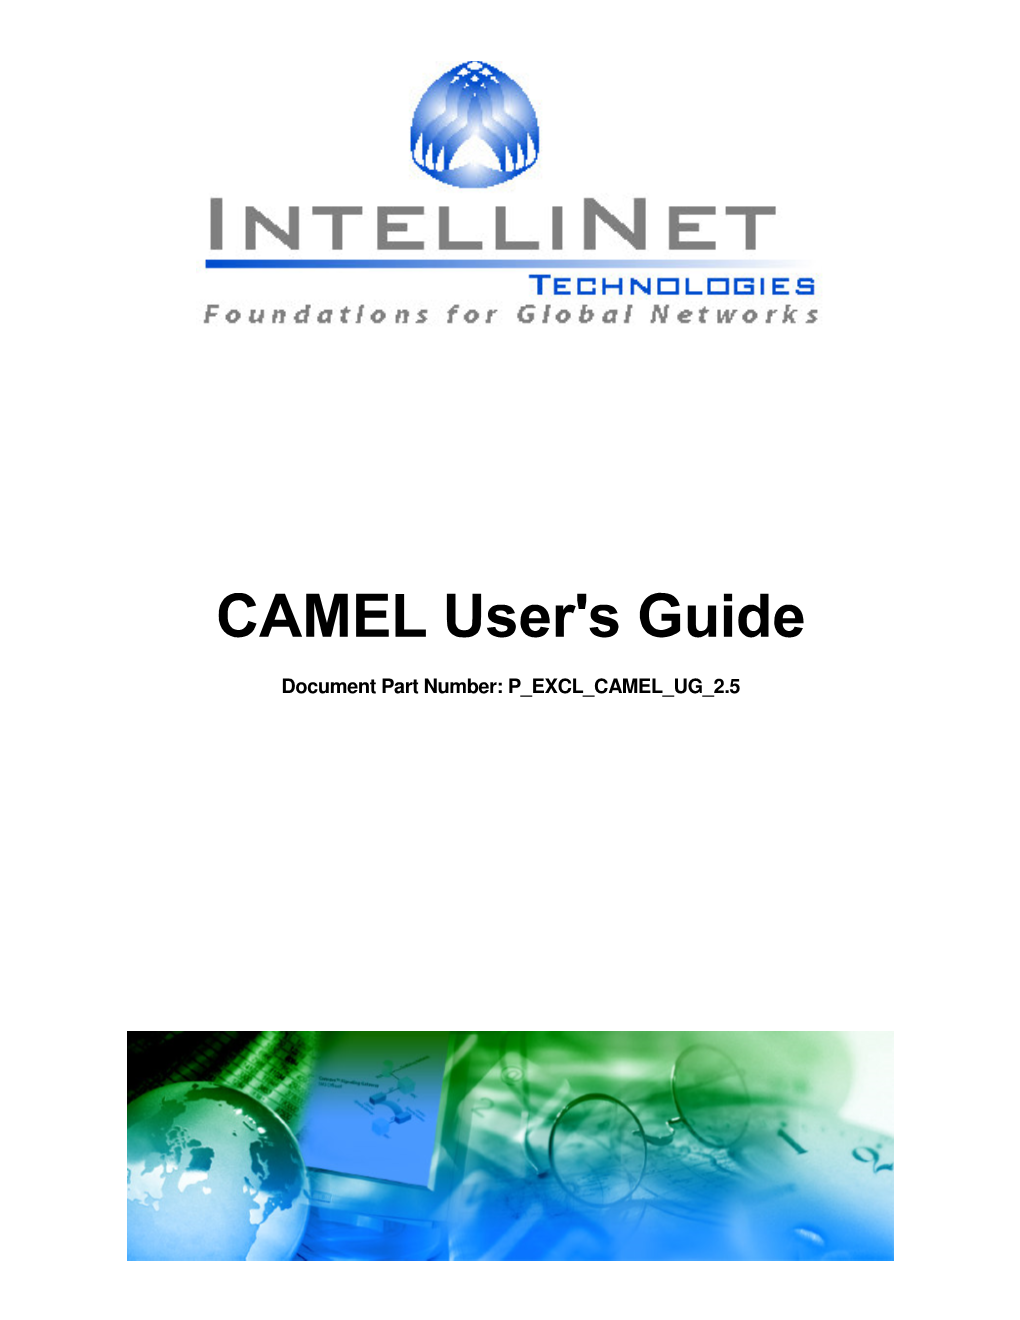 CAMEL User's Guide Contains the Following Information: No Title Description 1 Introduction to CAMEL Overview of CAMEL Protocols